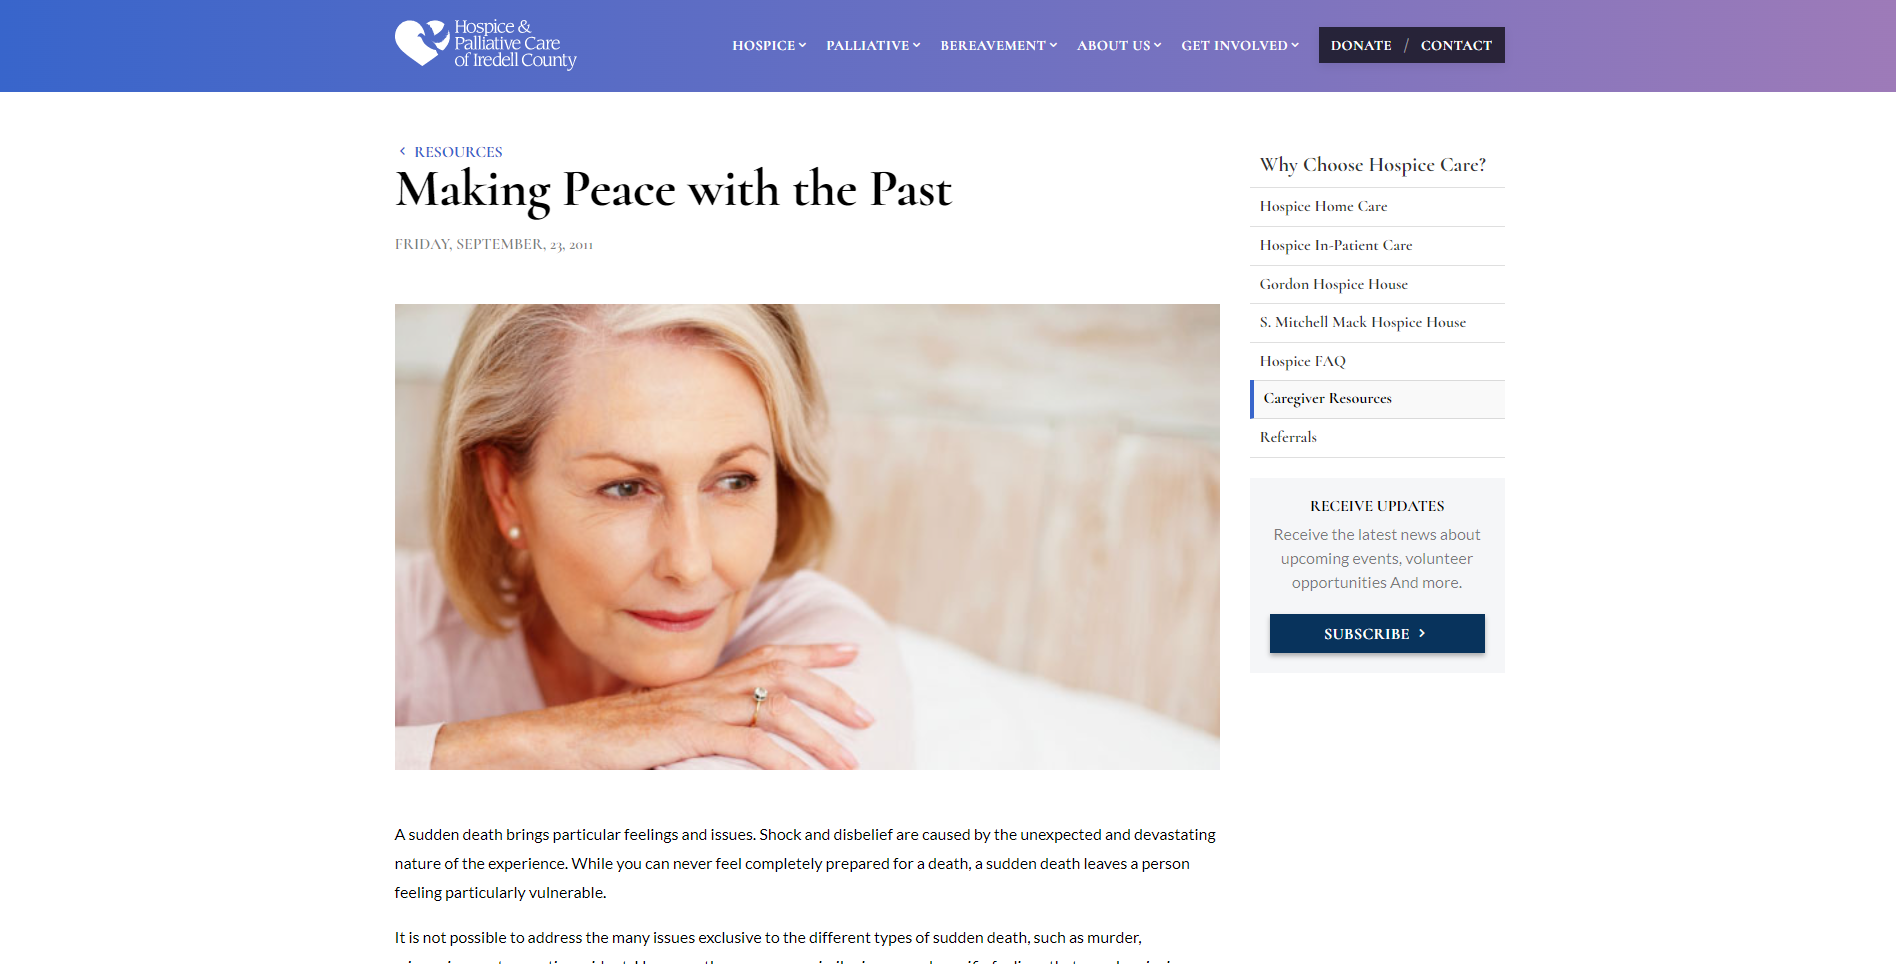 Making Peace with the Past